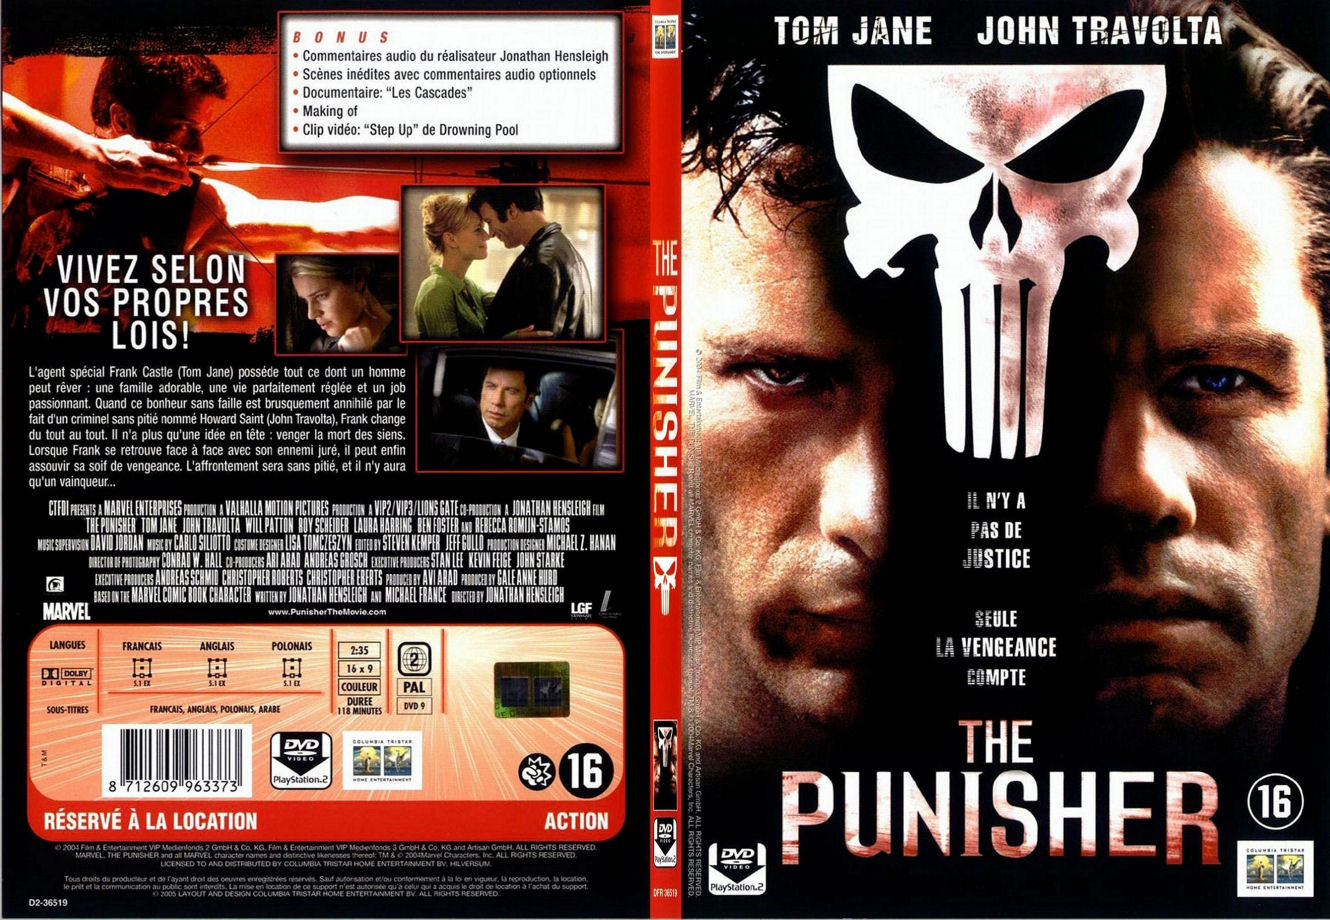 Jaquette DVD The punisher - SLIM